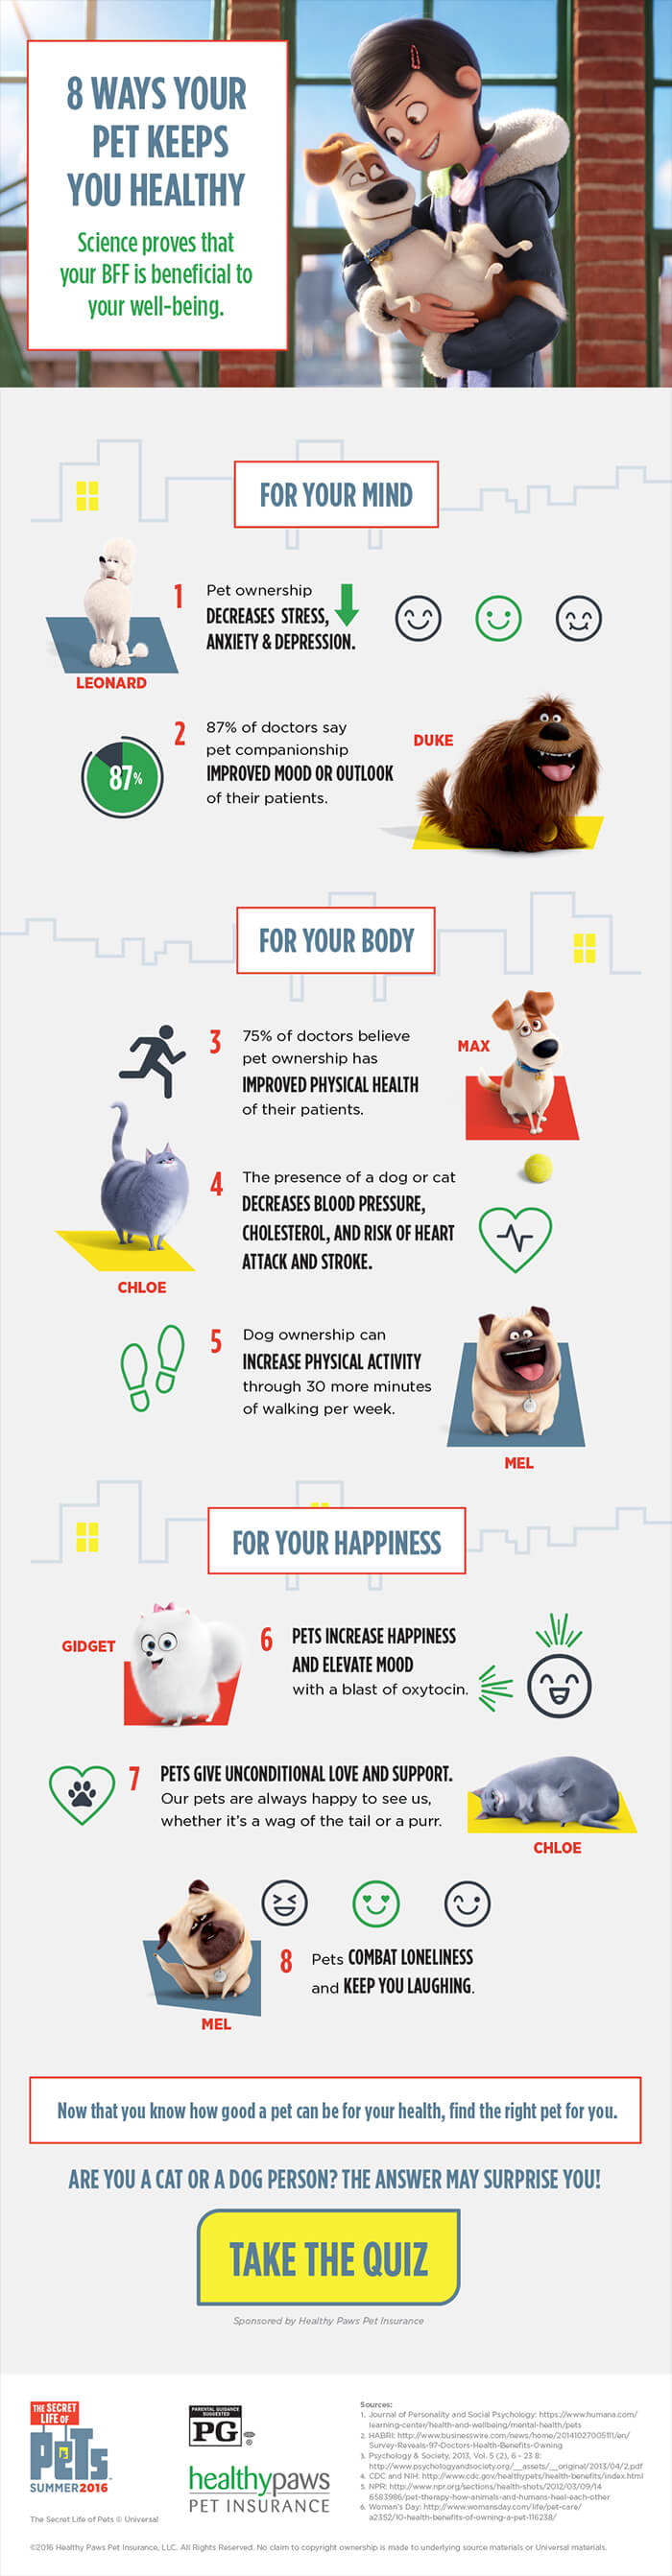 8-ways-your-pet-keeps-you-healthy